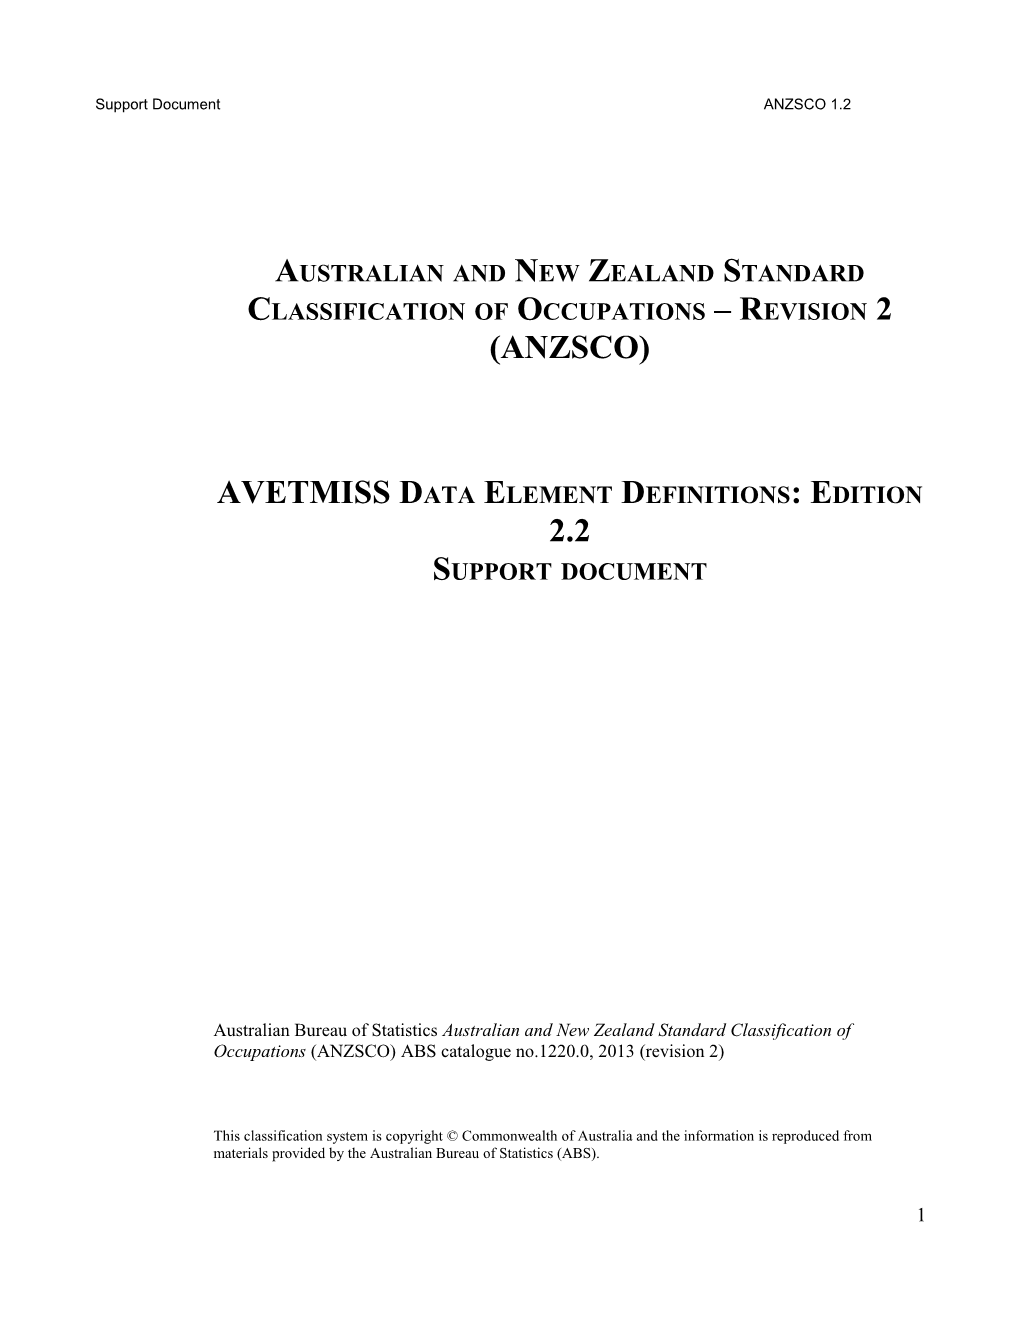 Australian and New Zealand Standard Classification of Occupations Revision 2 (ANZSCO)